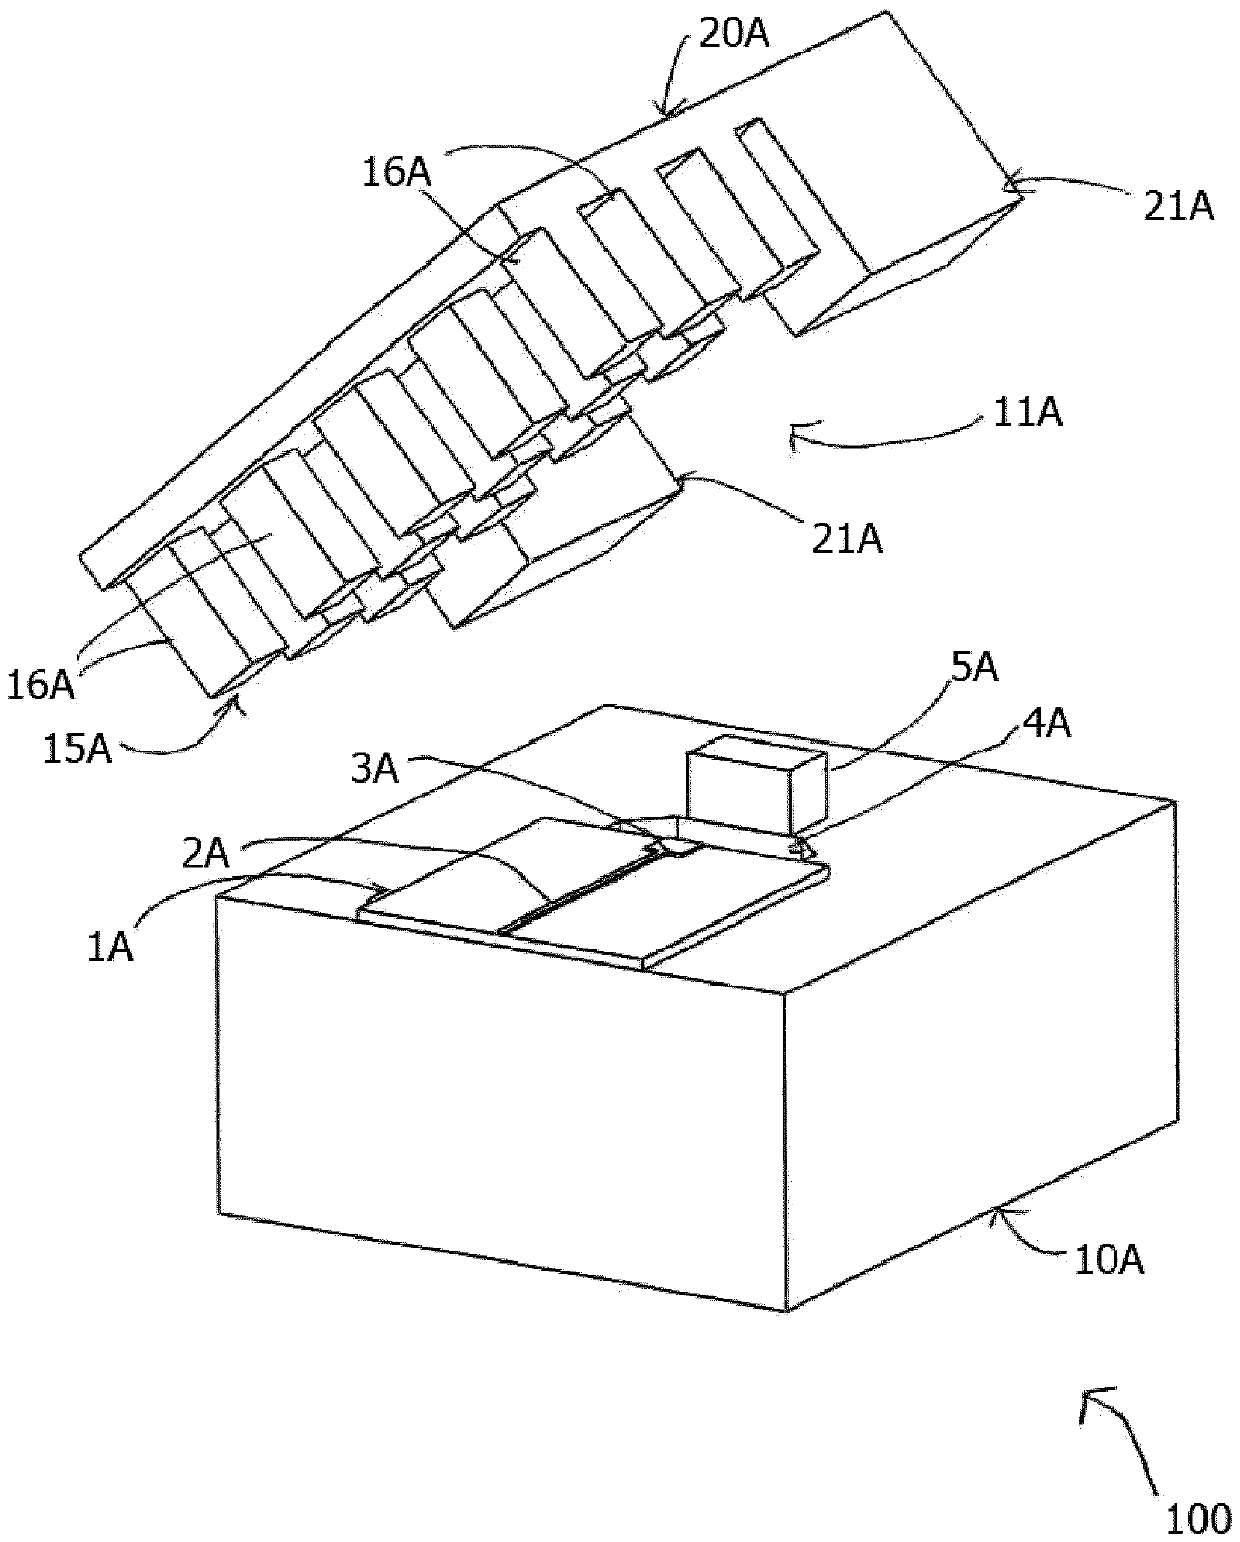 Packaging structure comprising at least one transition forming contactless interface